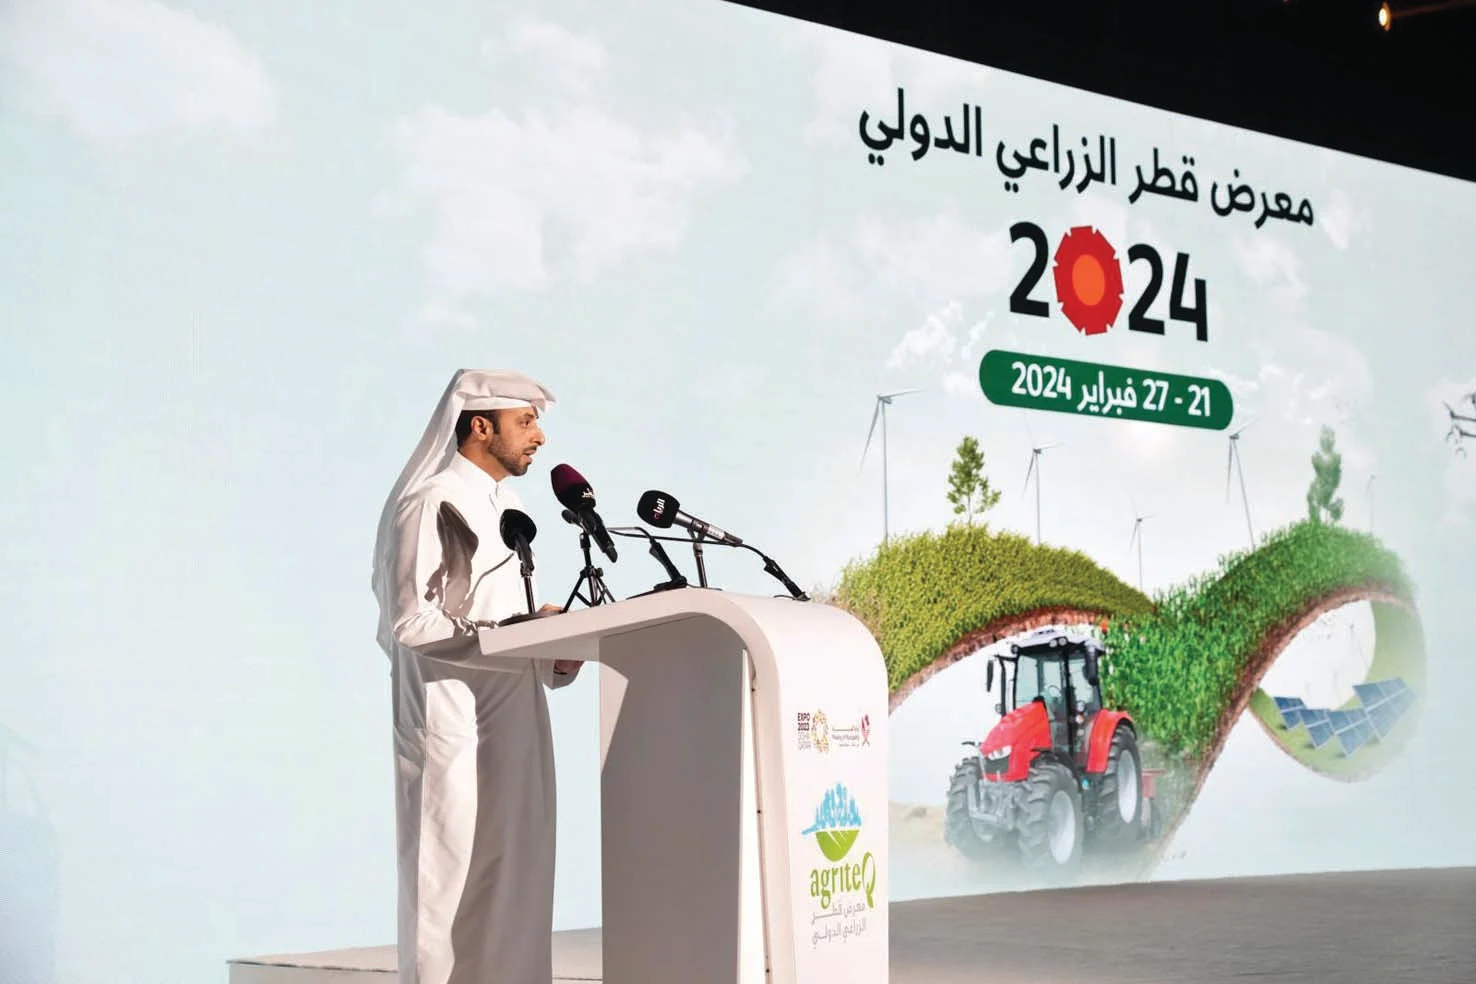 Minister of Municipality: Over 80 Countries Participated in AgriteQ 2024